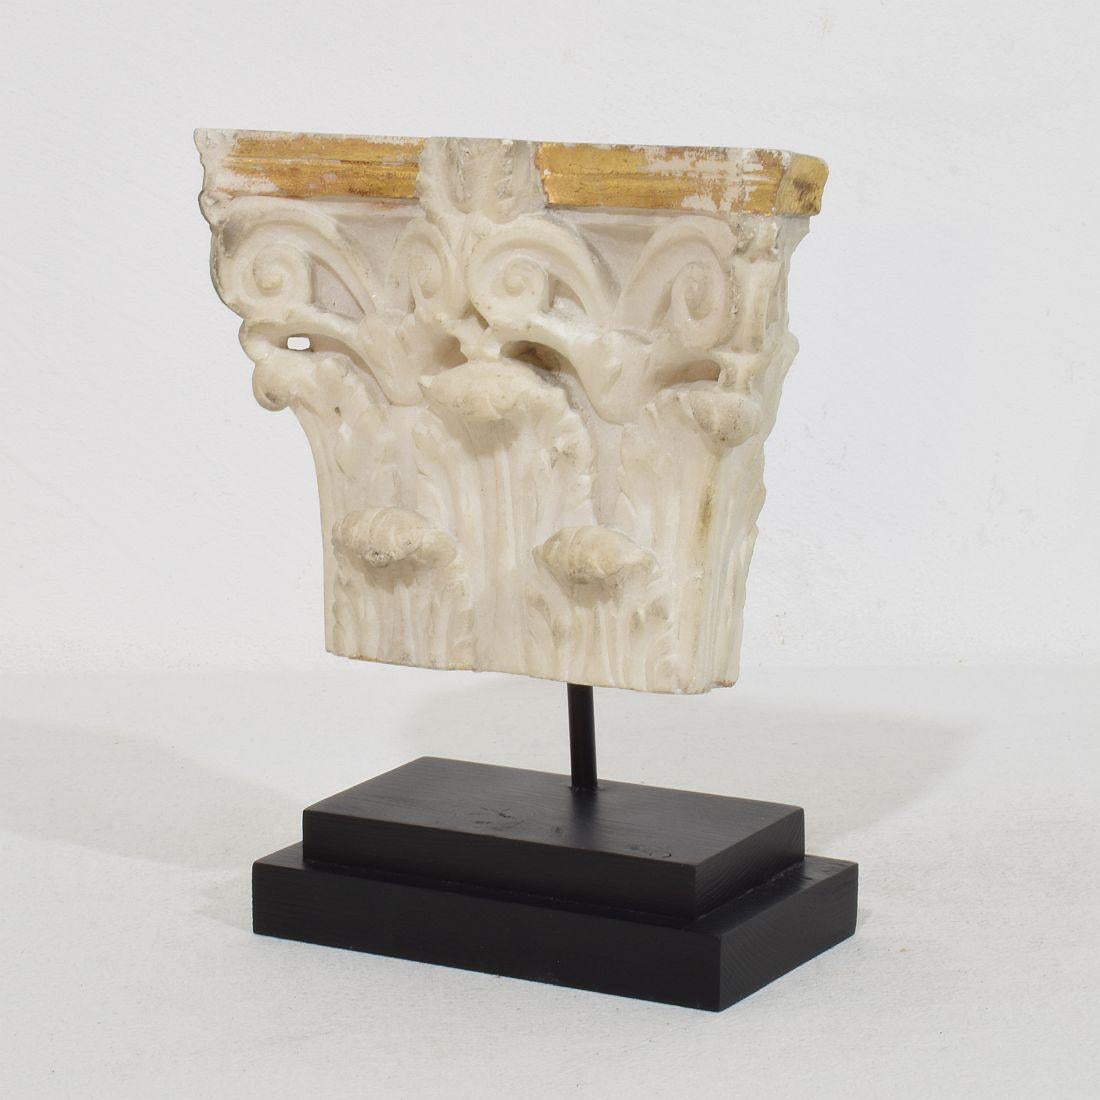 Lovely small hand-carved white marble capital with traces of its original gilding. 
Beautiful weathered white marble .
Italy circa 1780
Weathered
Measurements include the wooden pedestal
H:18cm  W:15cm D:8cm 